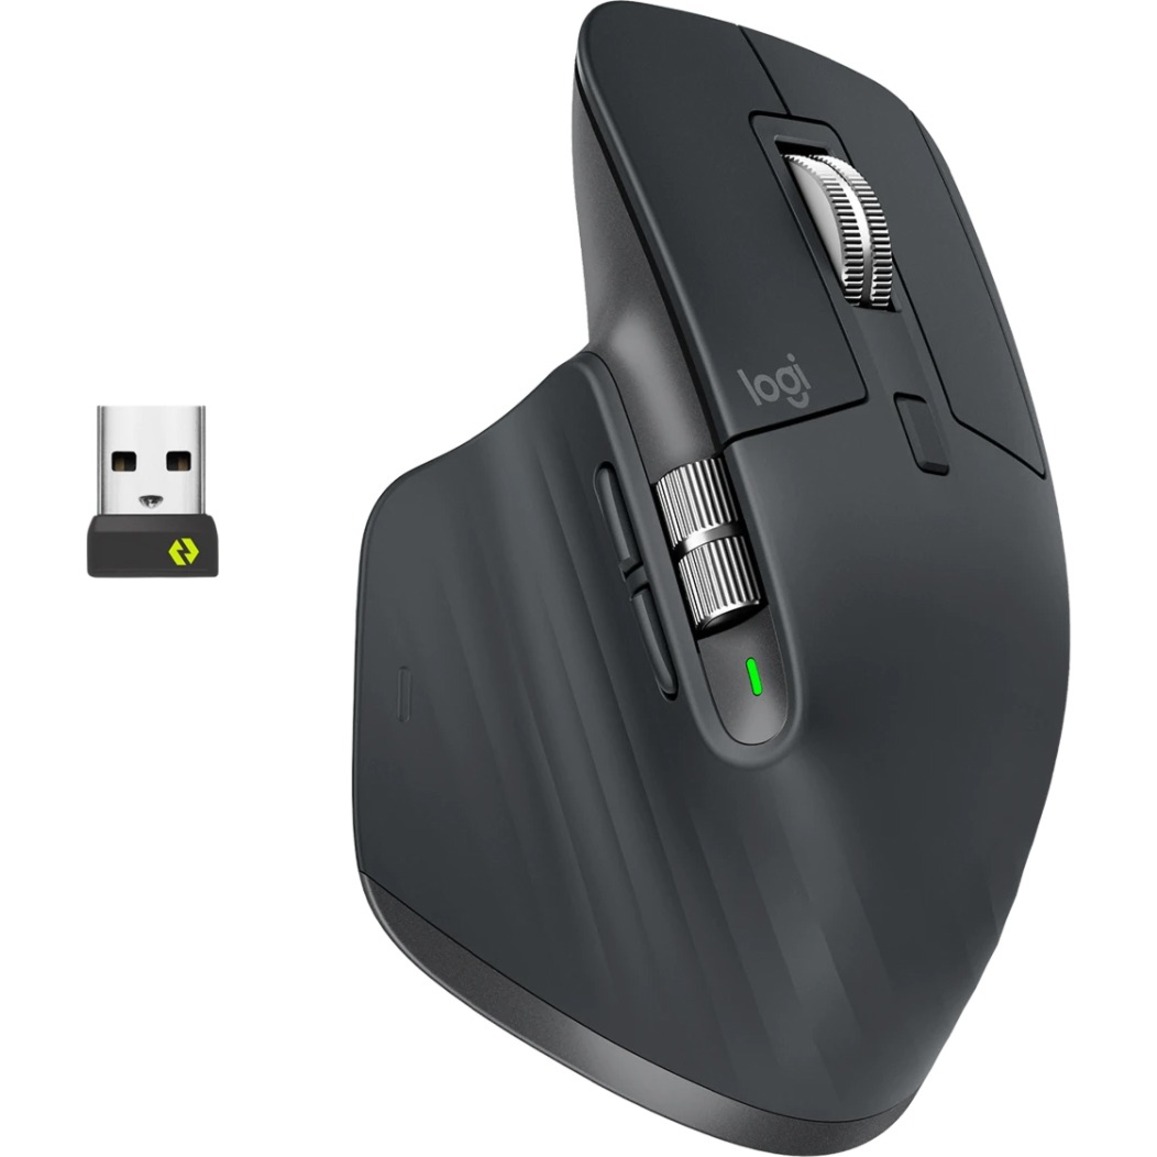 Logitech MX Master 3 for Business Mouse, Graphite $86.39 with Free Shipping @ Walmart.com